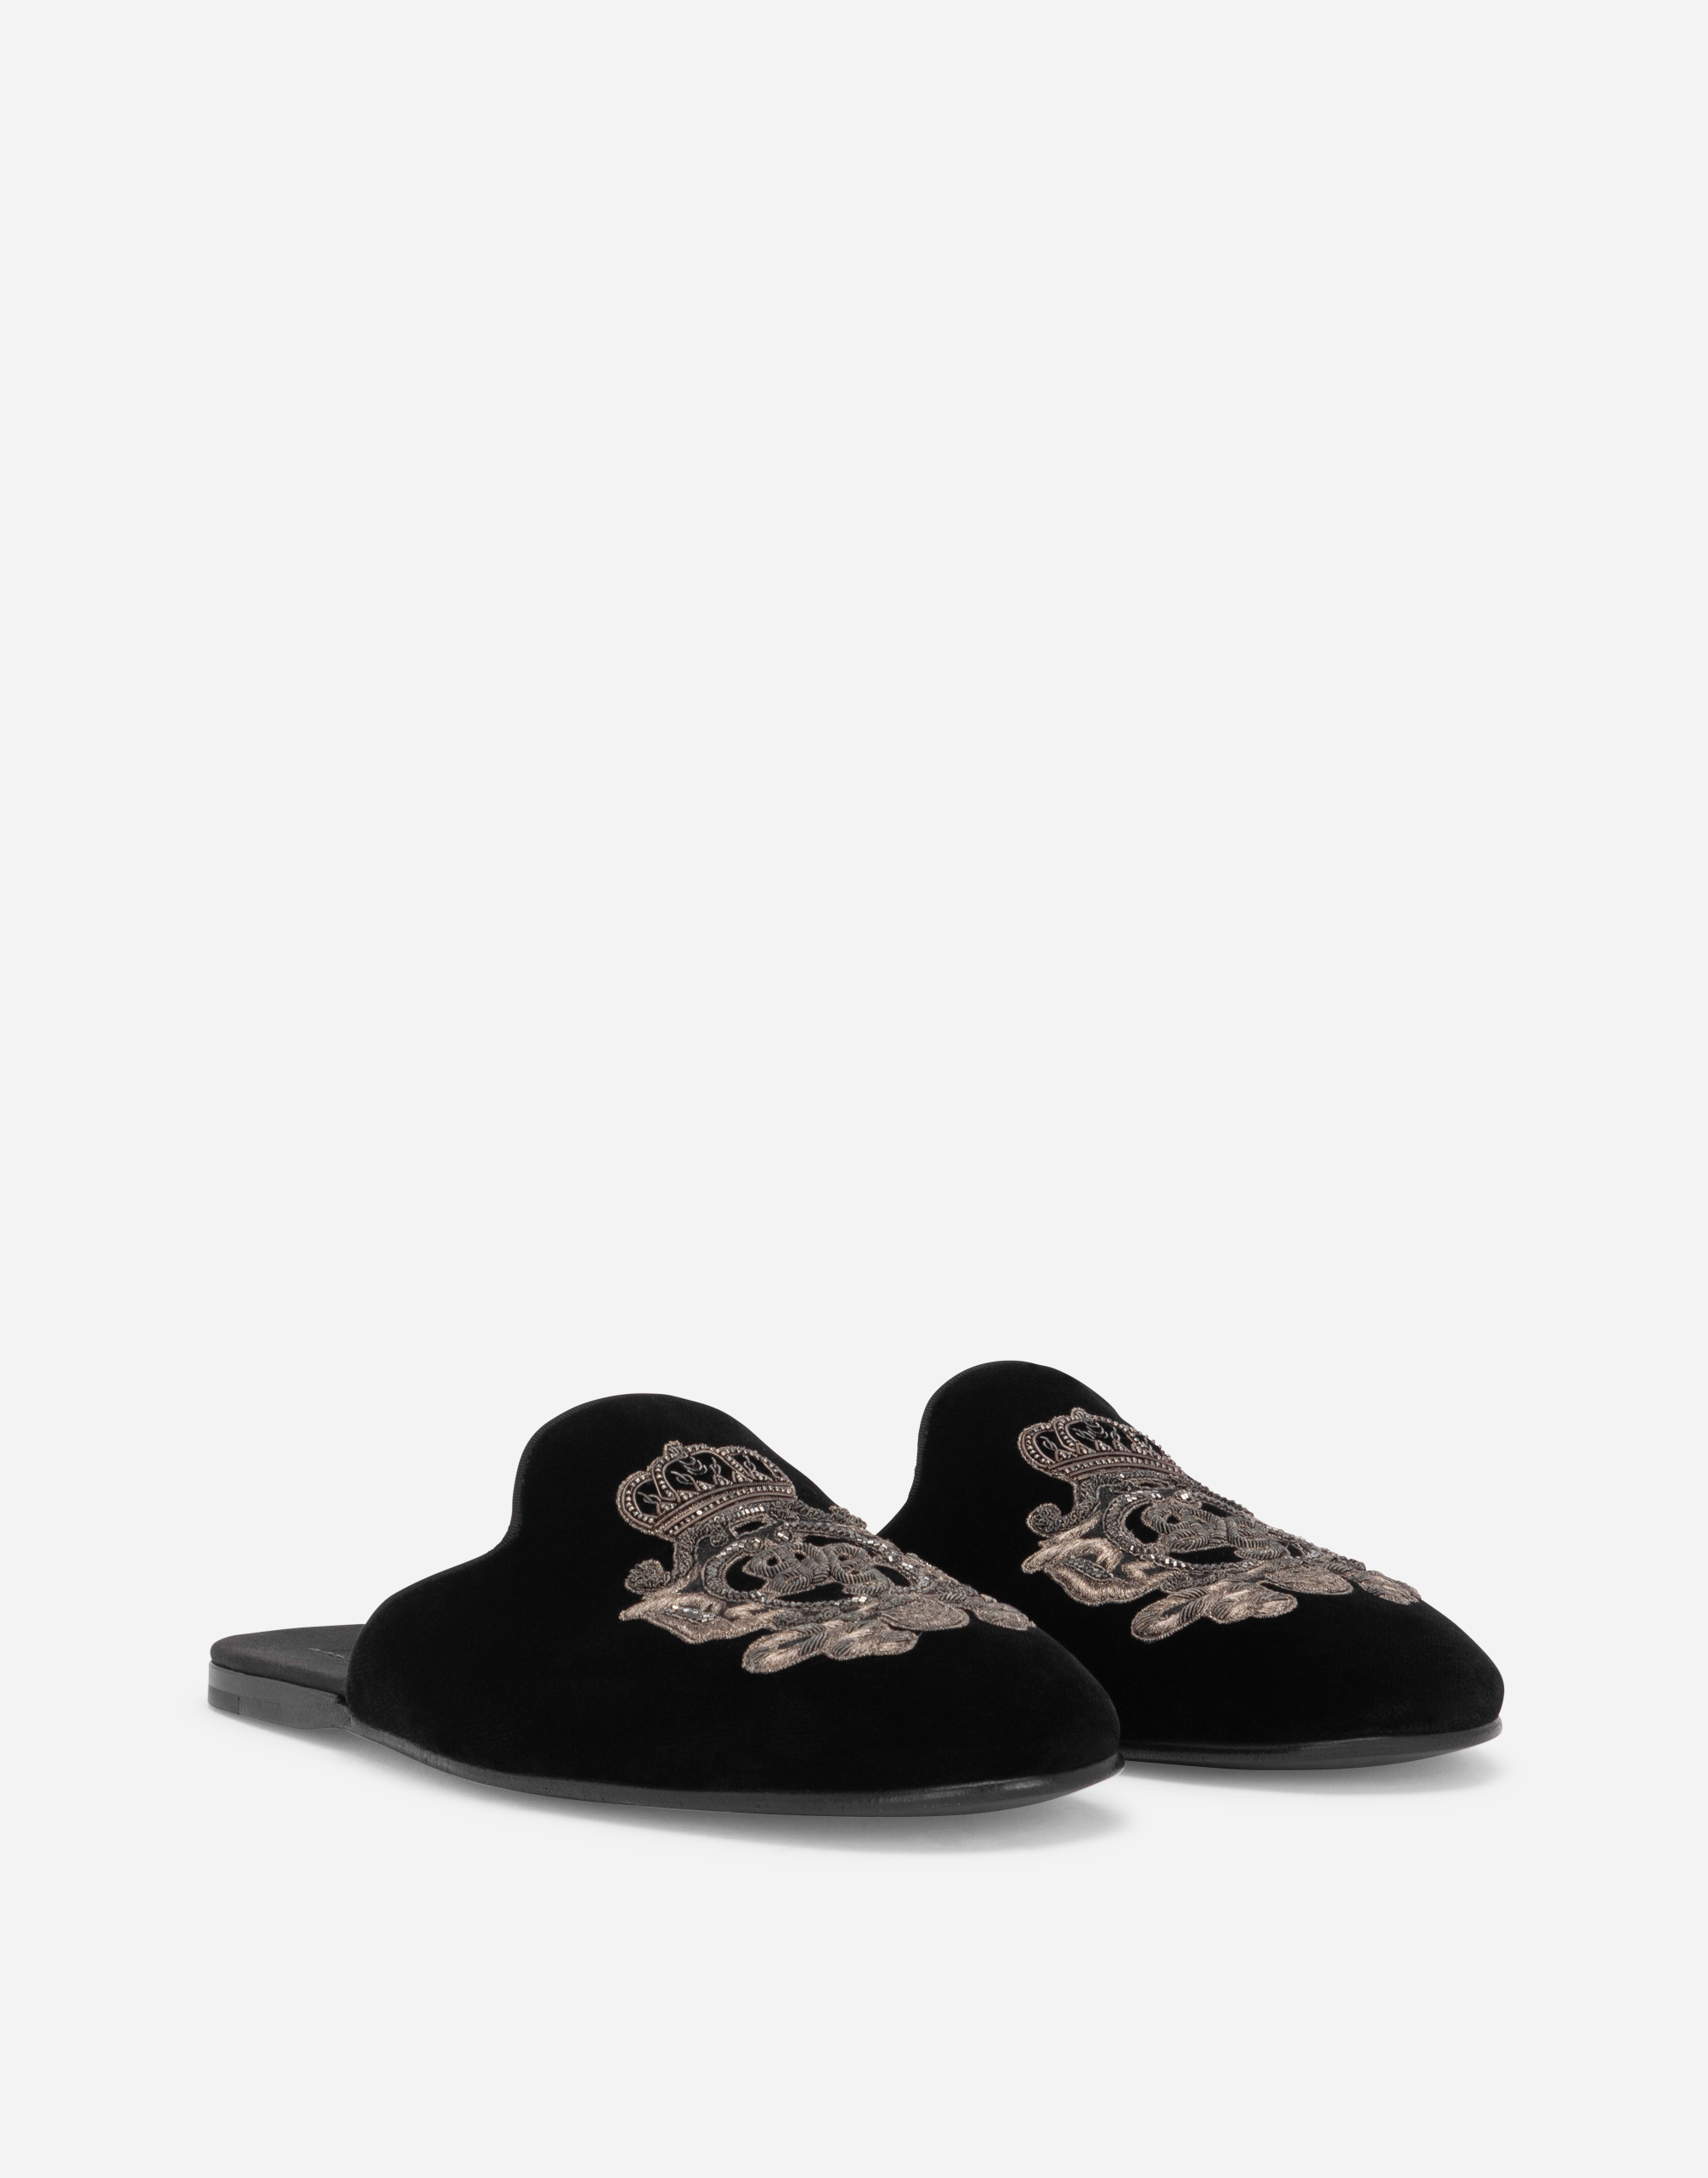 Velvet slippers with coat of arms embroidery in Multicolor for Men |  Dolce&Gabbana®